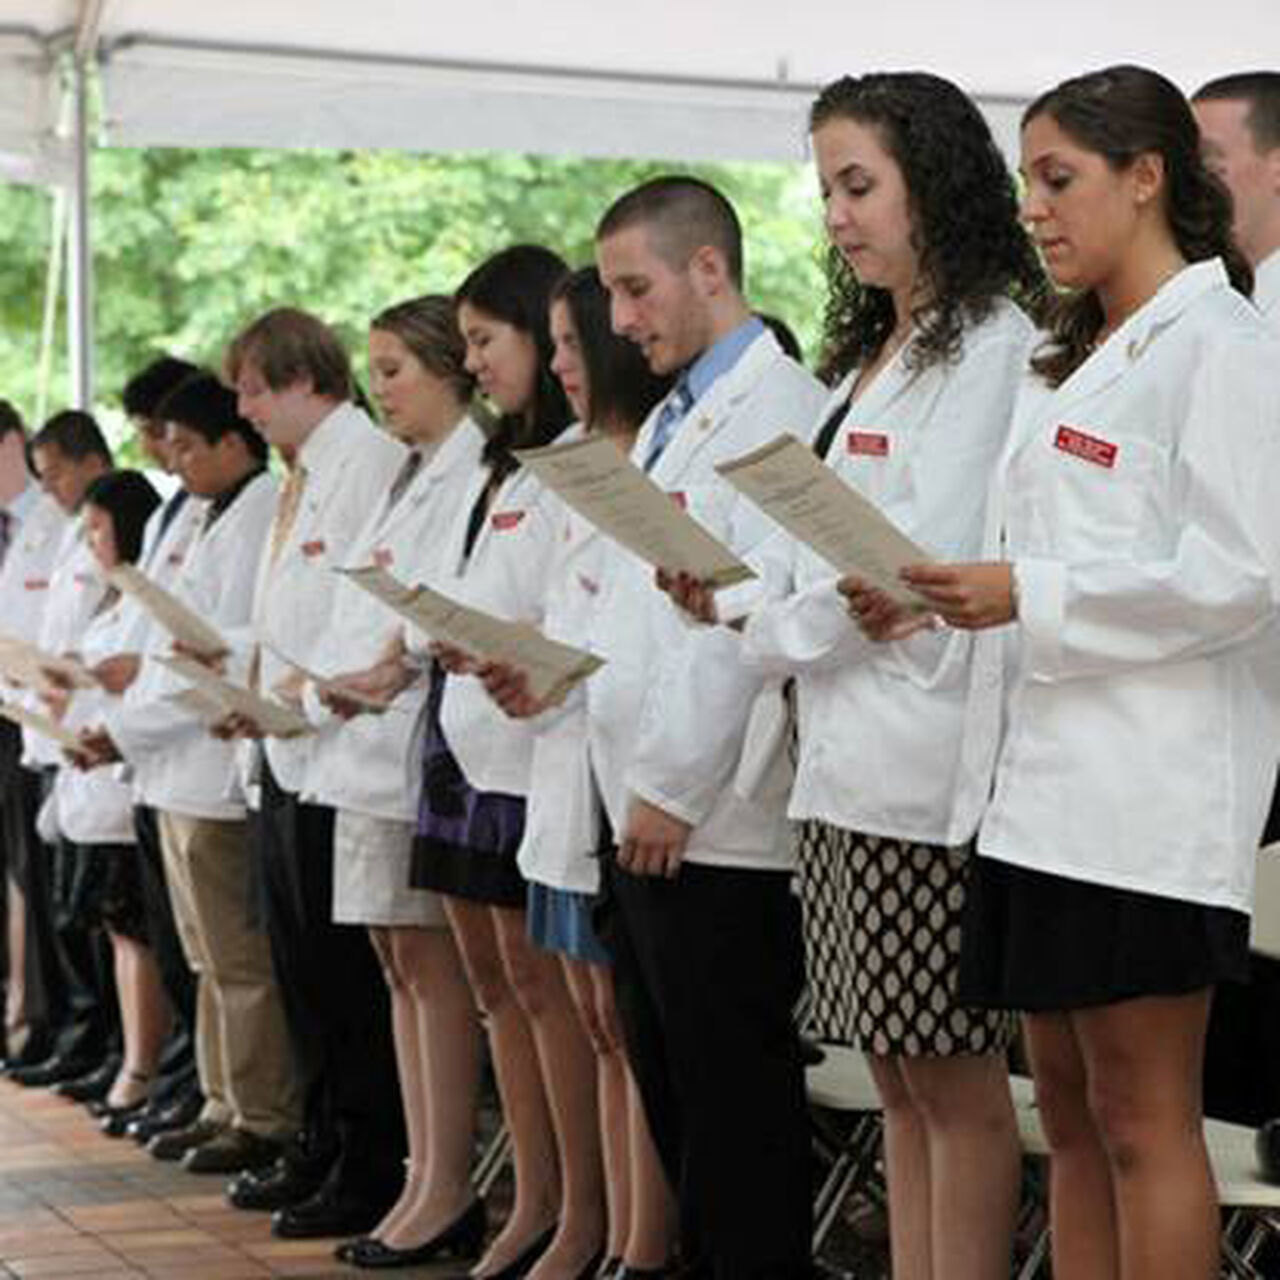 New Jersey Medical Students at white coat ceremony image number 0